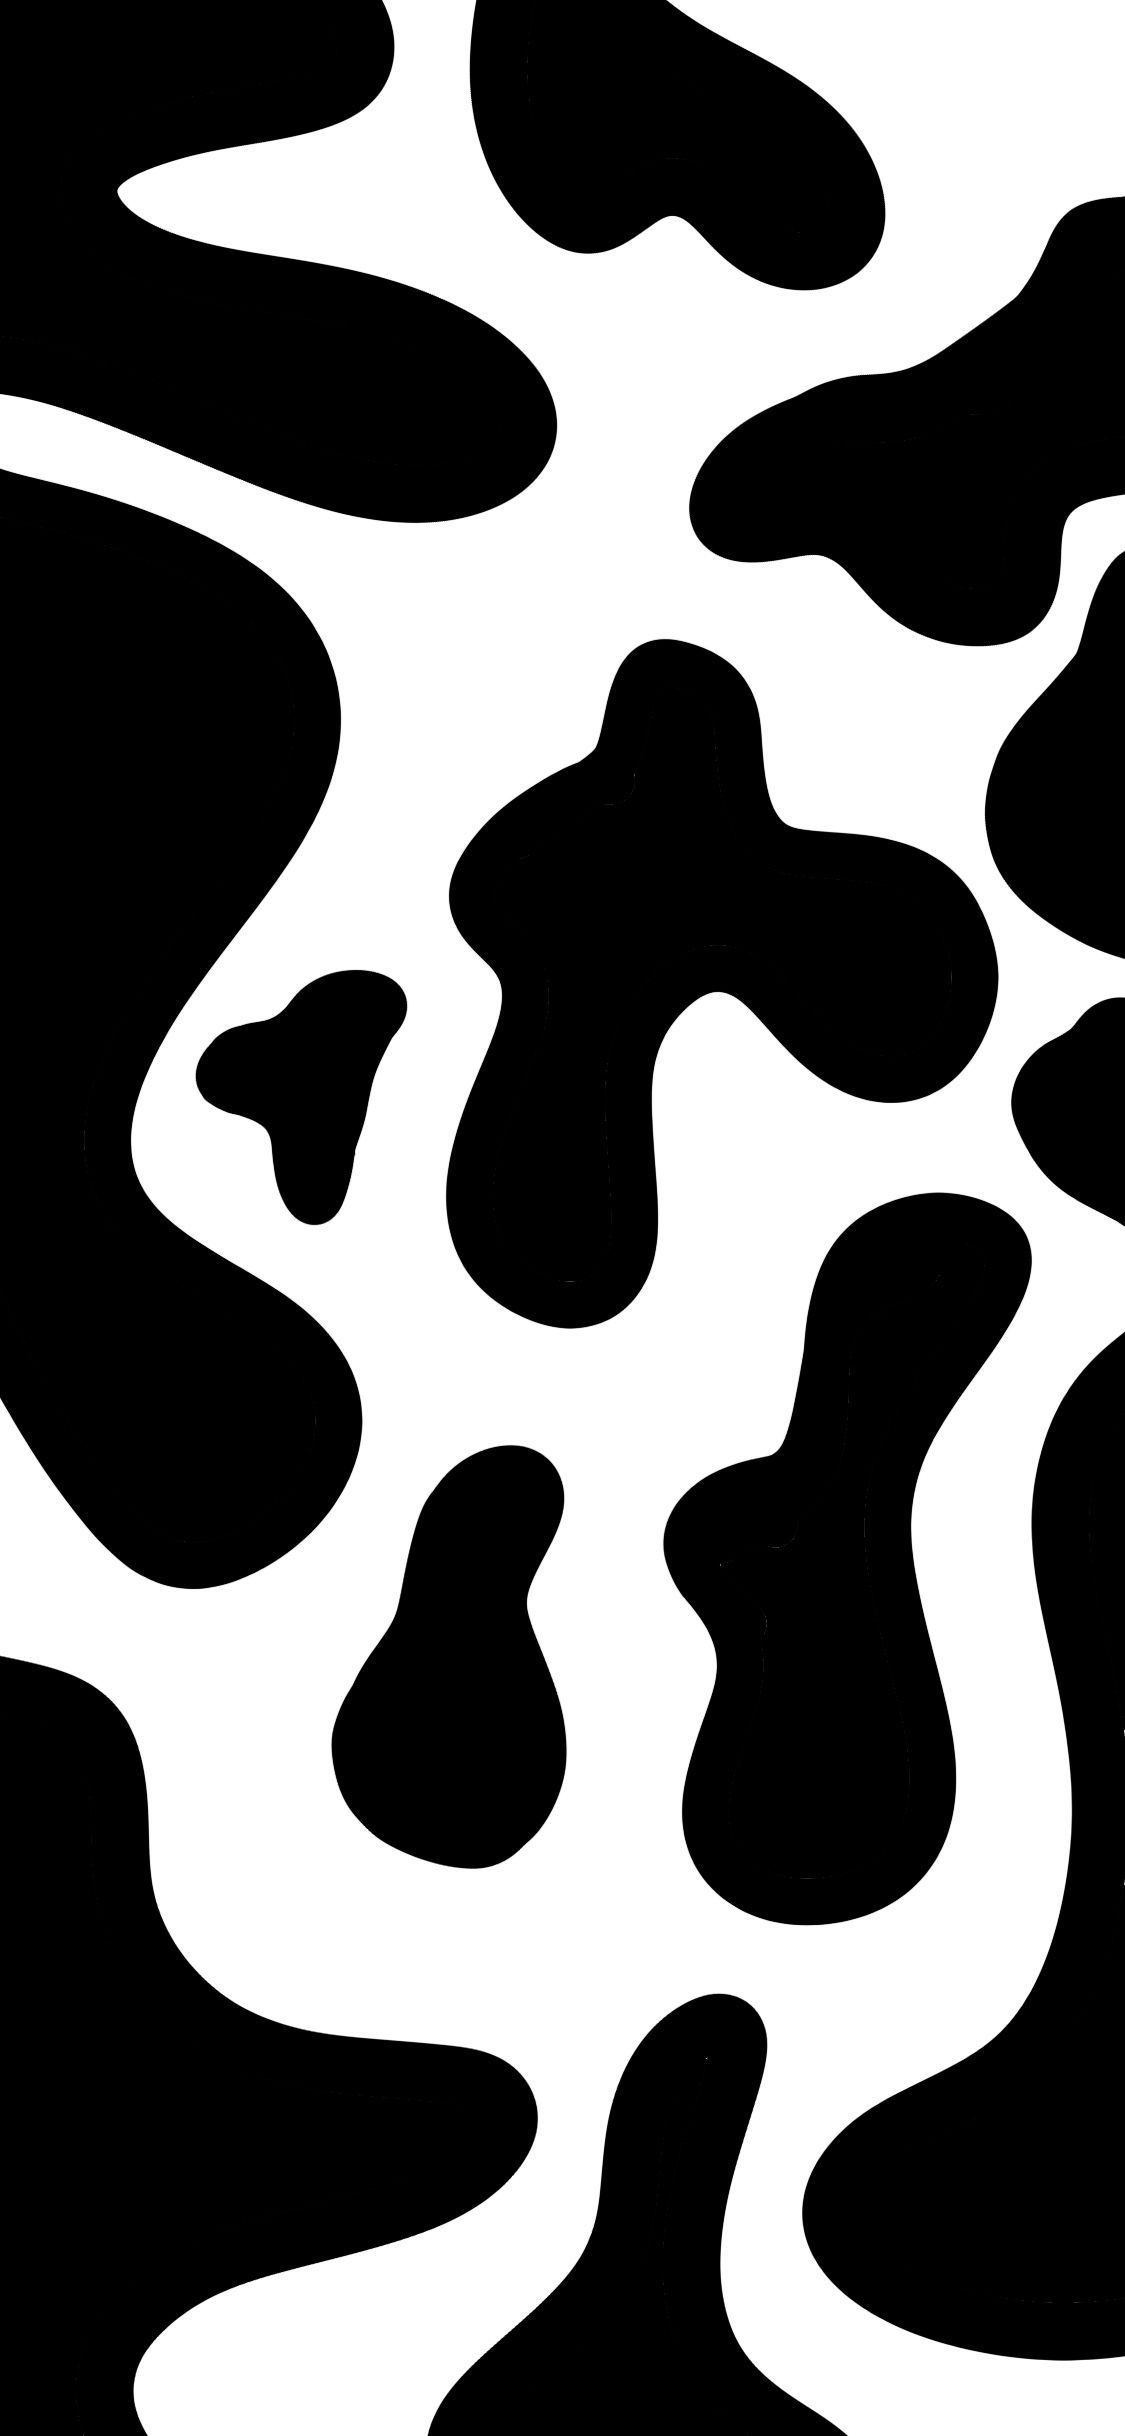 Wallpaper cow print aesthetic background animal print black and white iPhone. Cow print wallpaper, Cow wallpaper, Purple wallpaper iphone